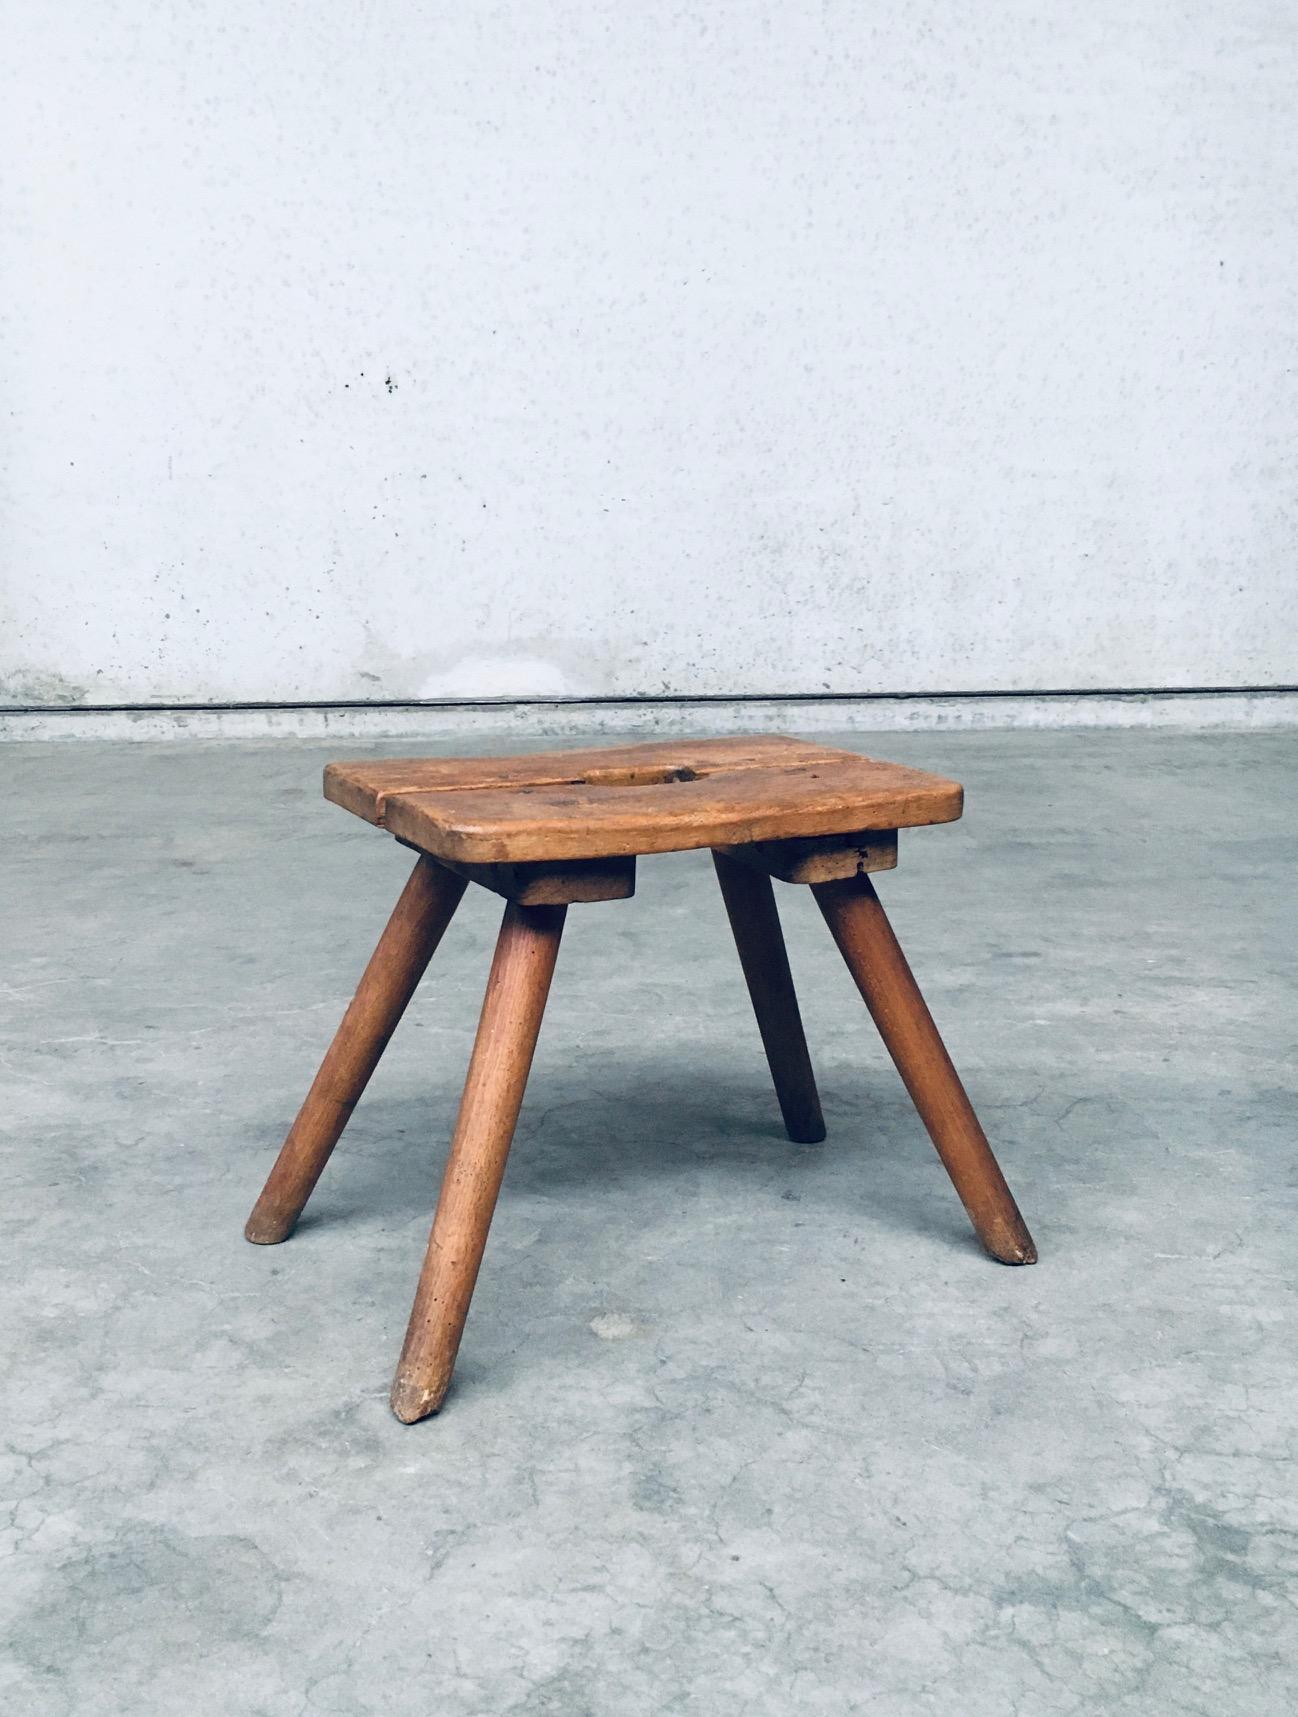 Original Craftsman Handmade Folk Art Milk Stool. Made in Belgium, late 1800's - early 1900's. Solid oak constructed stool with central handgrip. Simple in design, with 4 turned legs and a seat made of 2 solid planks with a carved handgrip for easy